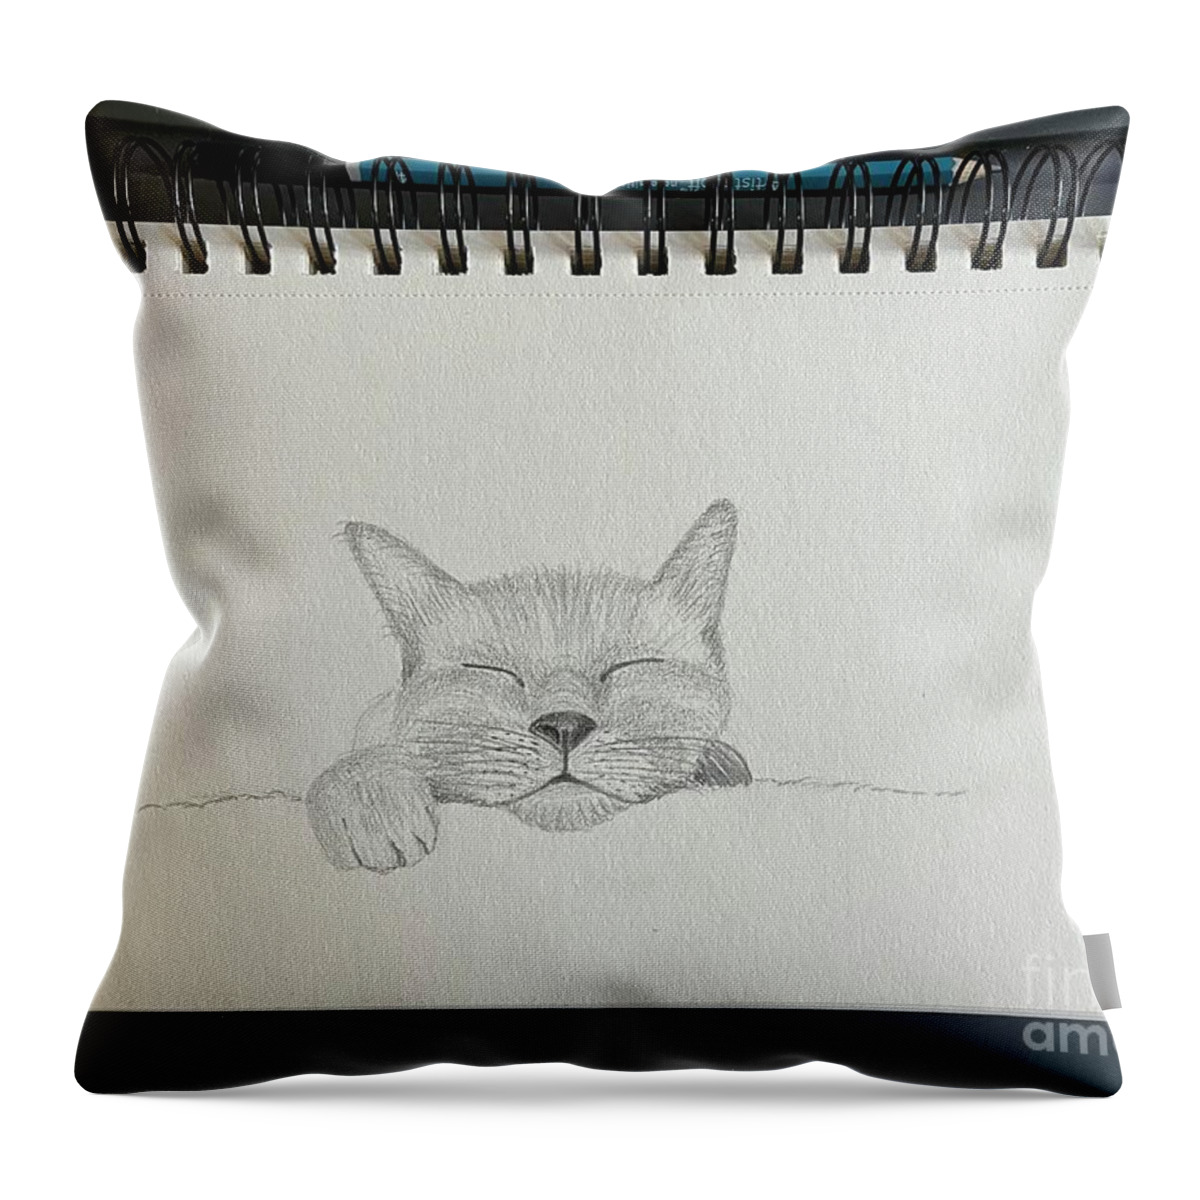  Throw Pillow featuring the drawing Sleeping Face Sketch by Donna Mibus